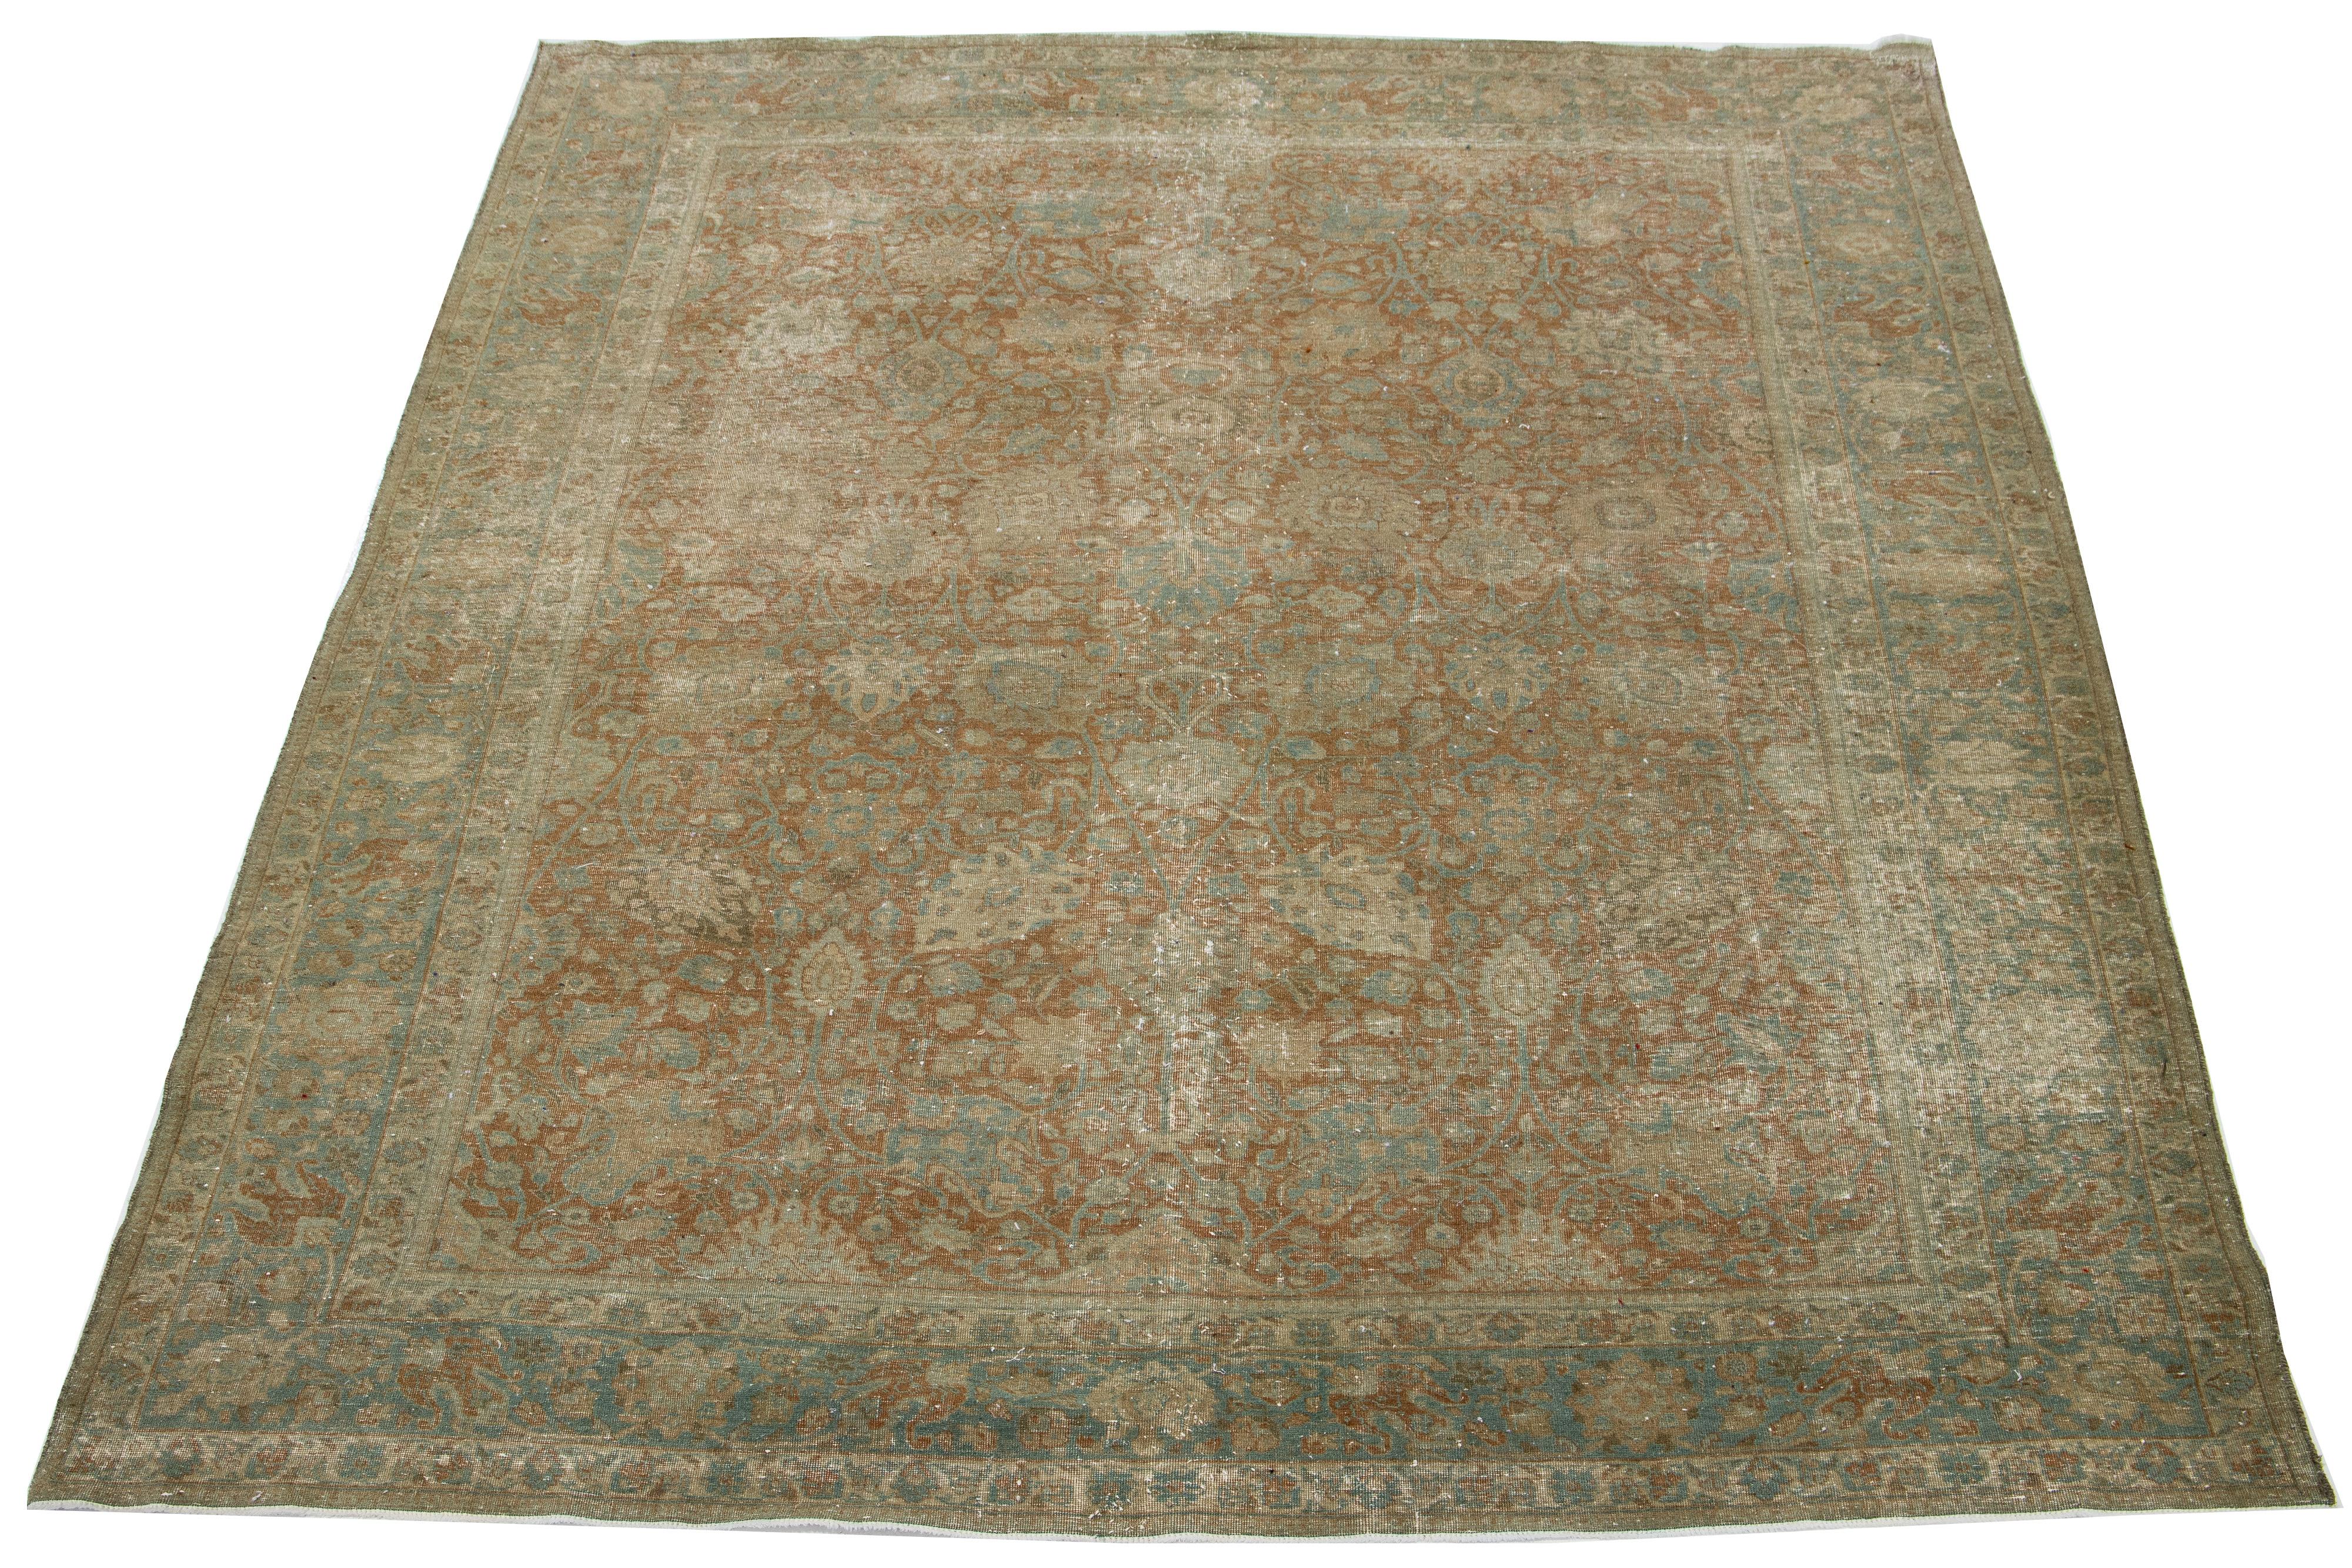 This beautifully handcrafted Persian Tabriz wool rug displays a classic all-over floral pattern. The brown background features shades of blue and beige.

This rug measures  8' x 10'4'.

Our Rugs are professionally cleaned before shipping.